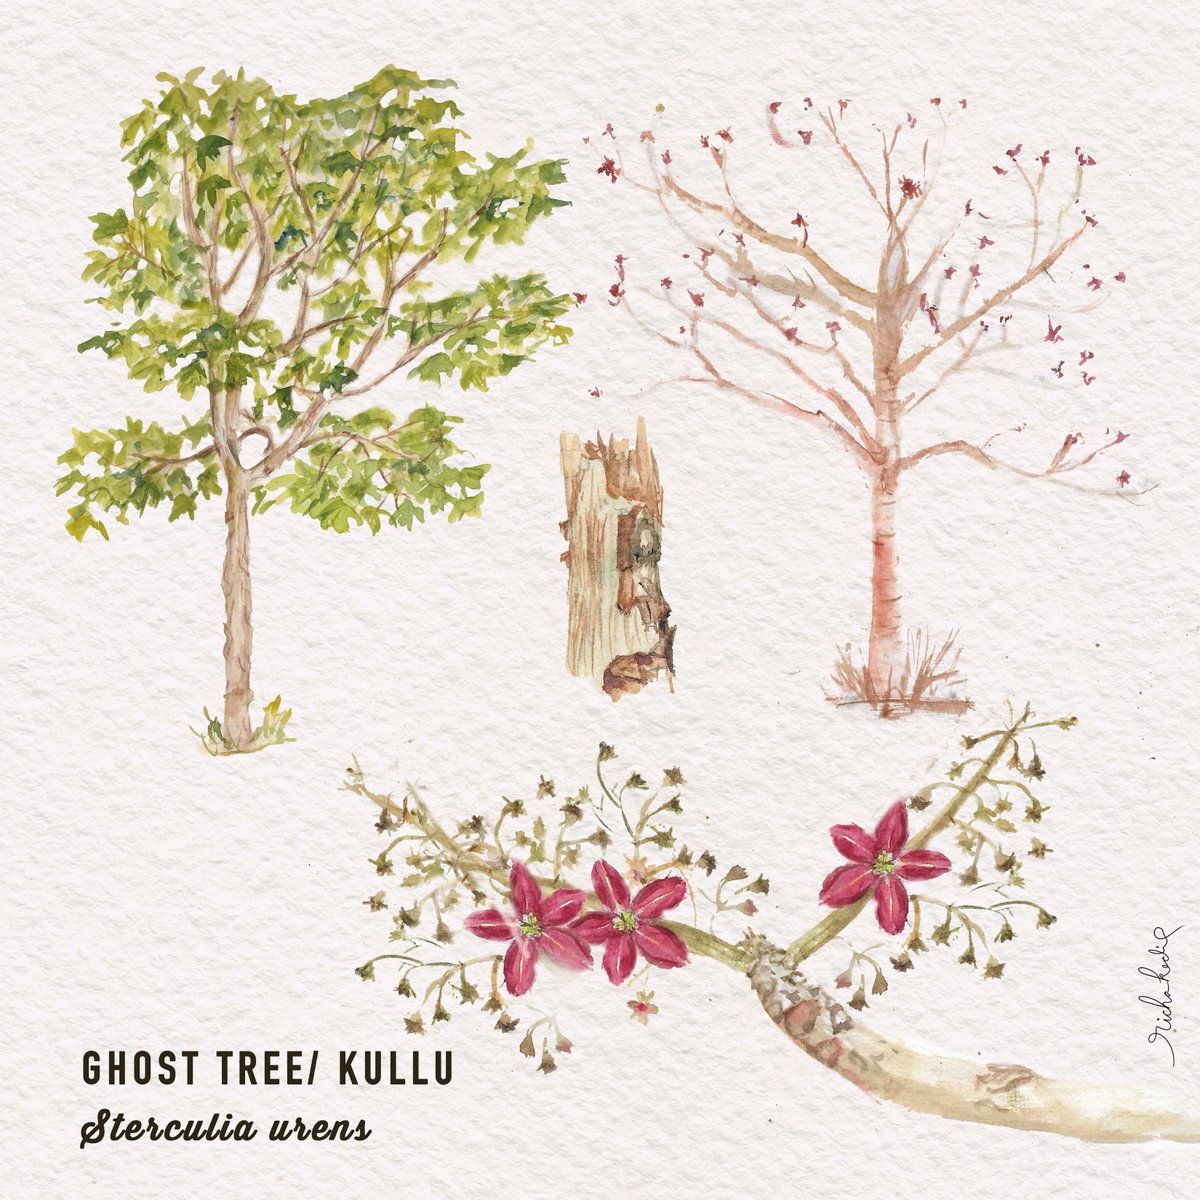 Ghost Tree or  Kullu sheds its leaves and outer bark in winters and photosynthesizes through its white bark. that shines on the slopes and can't be missed. Its bright red fruits look more attractive than its tiny, inconspicuous flowers. 
#IndiAves #treesofindia #botanicalart